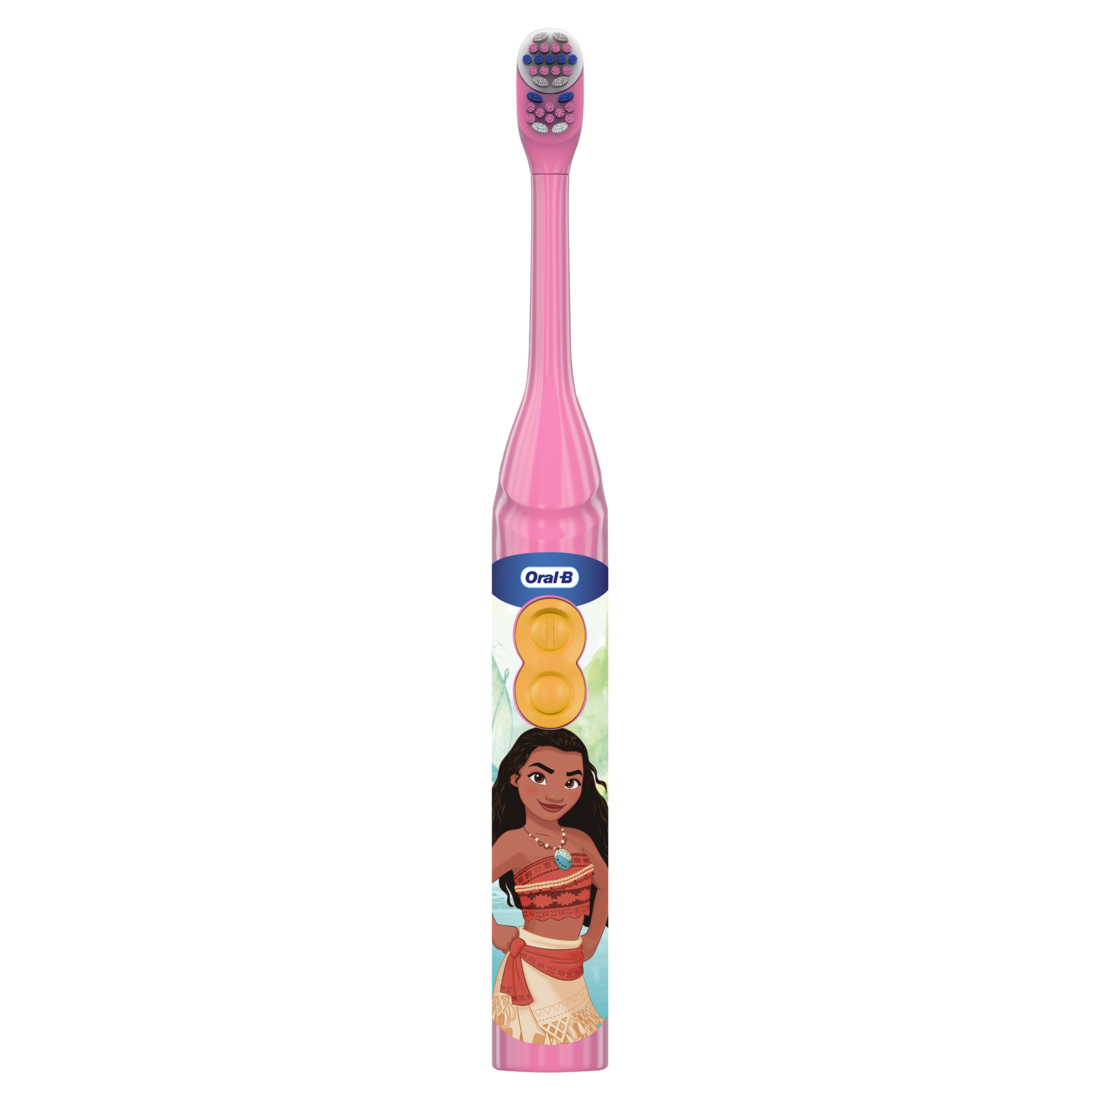 Oral-B Stages Princess Battery Toothbrush